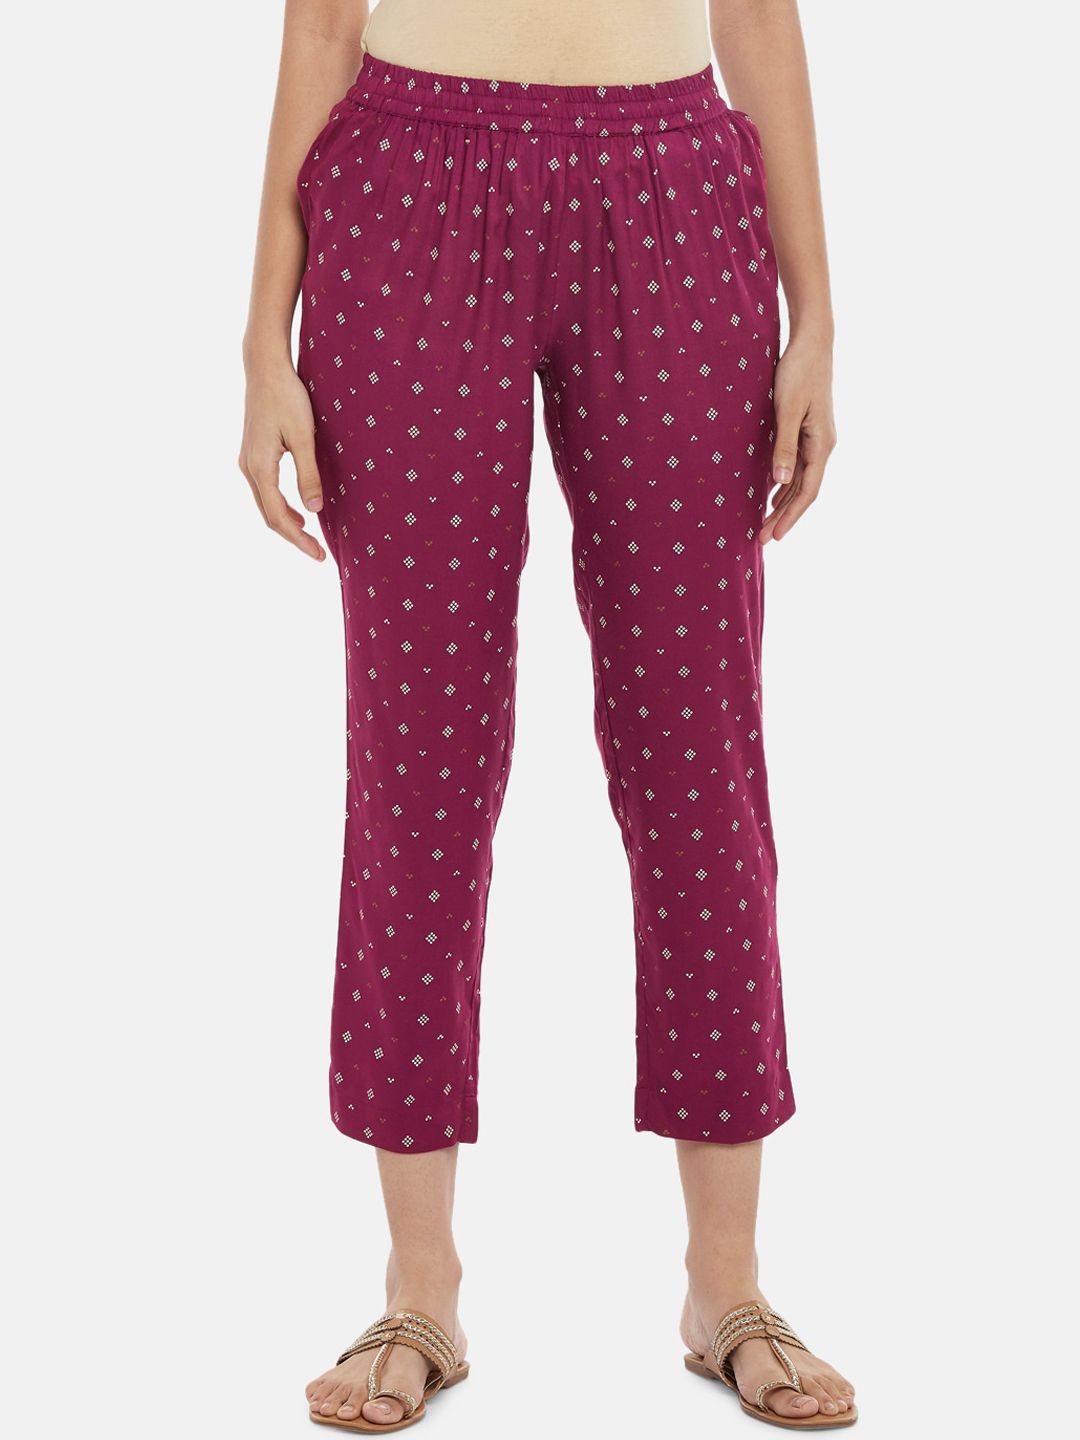 RANGMANCH BY PANTALOONS Women Maroon Printed Trousers Price in India